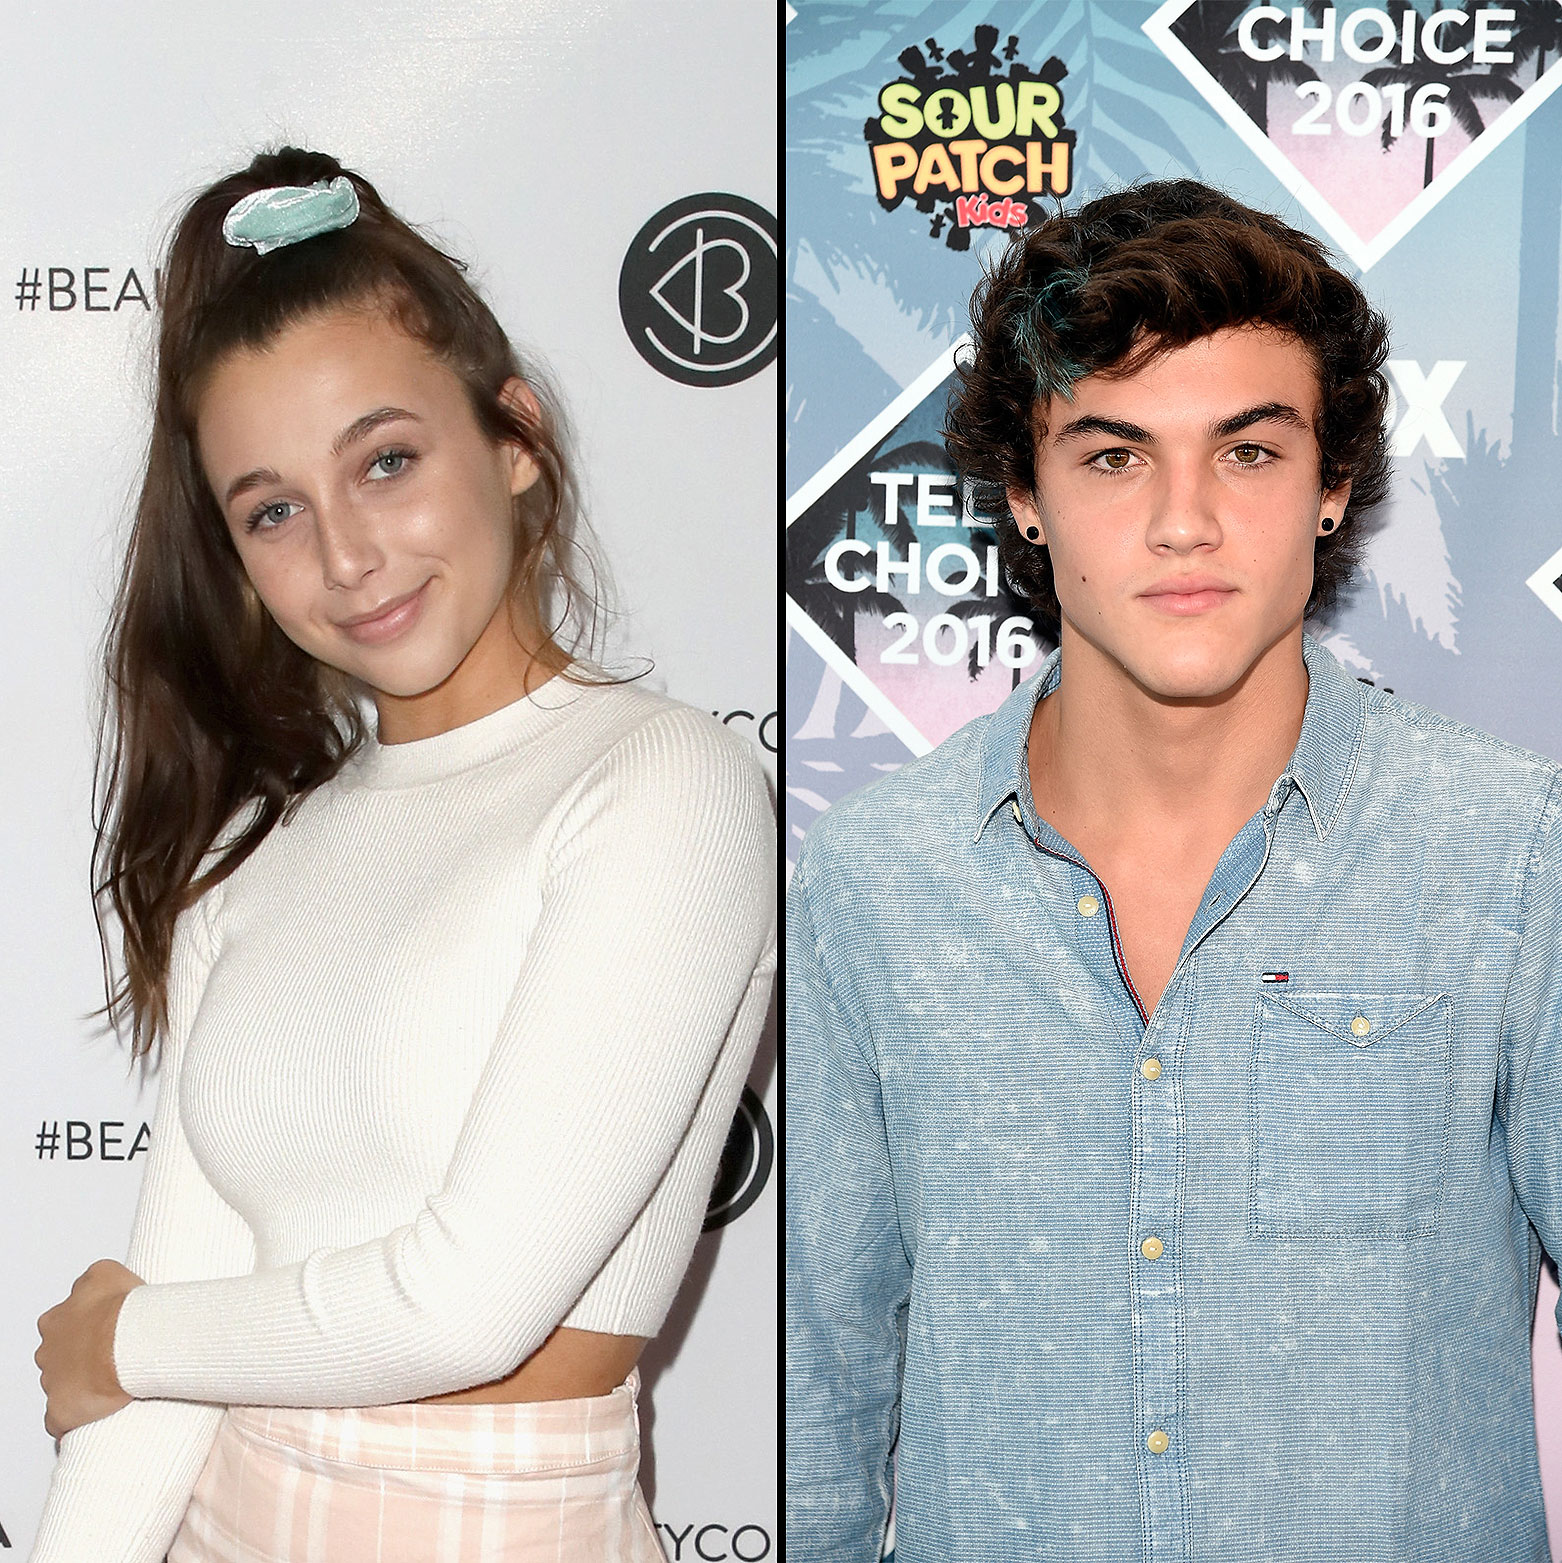 Why Emma Chamberlain and Role Model Decided to Go Public With Their Romance